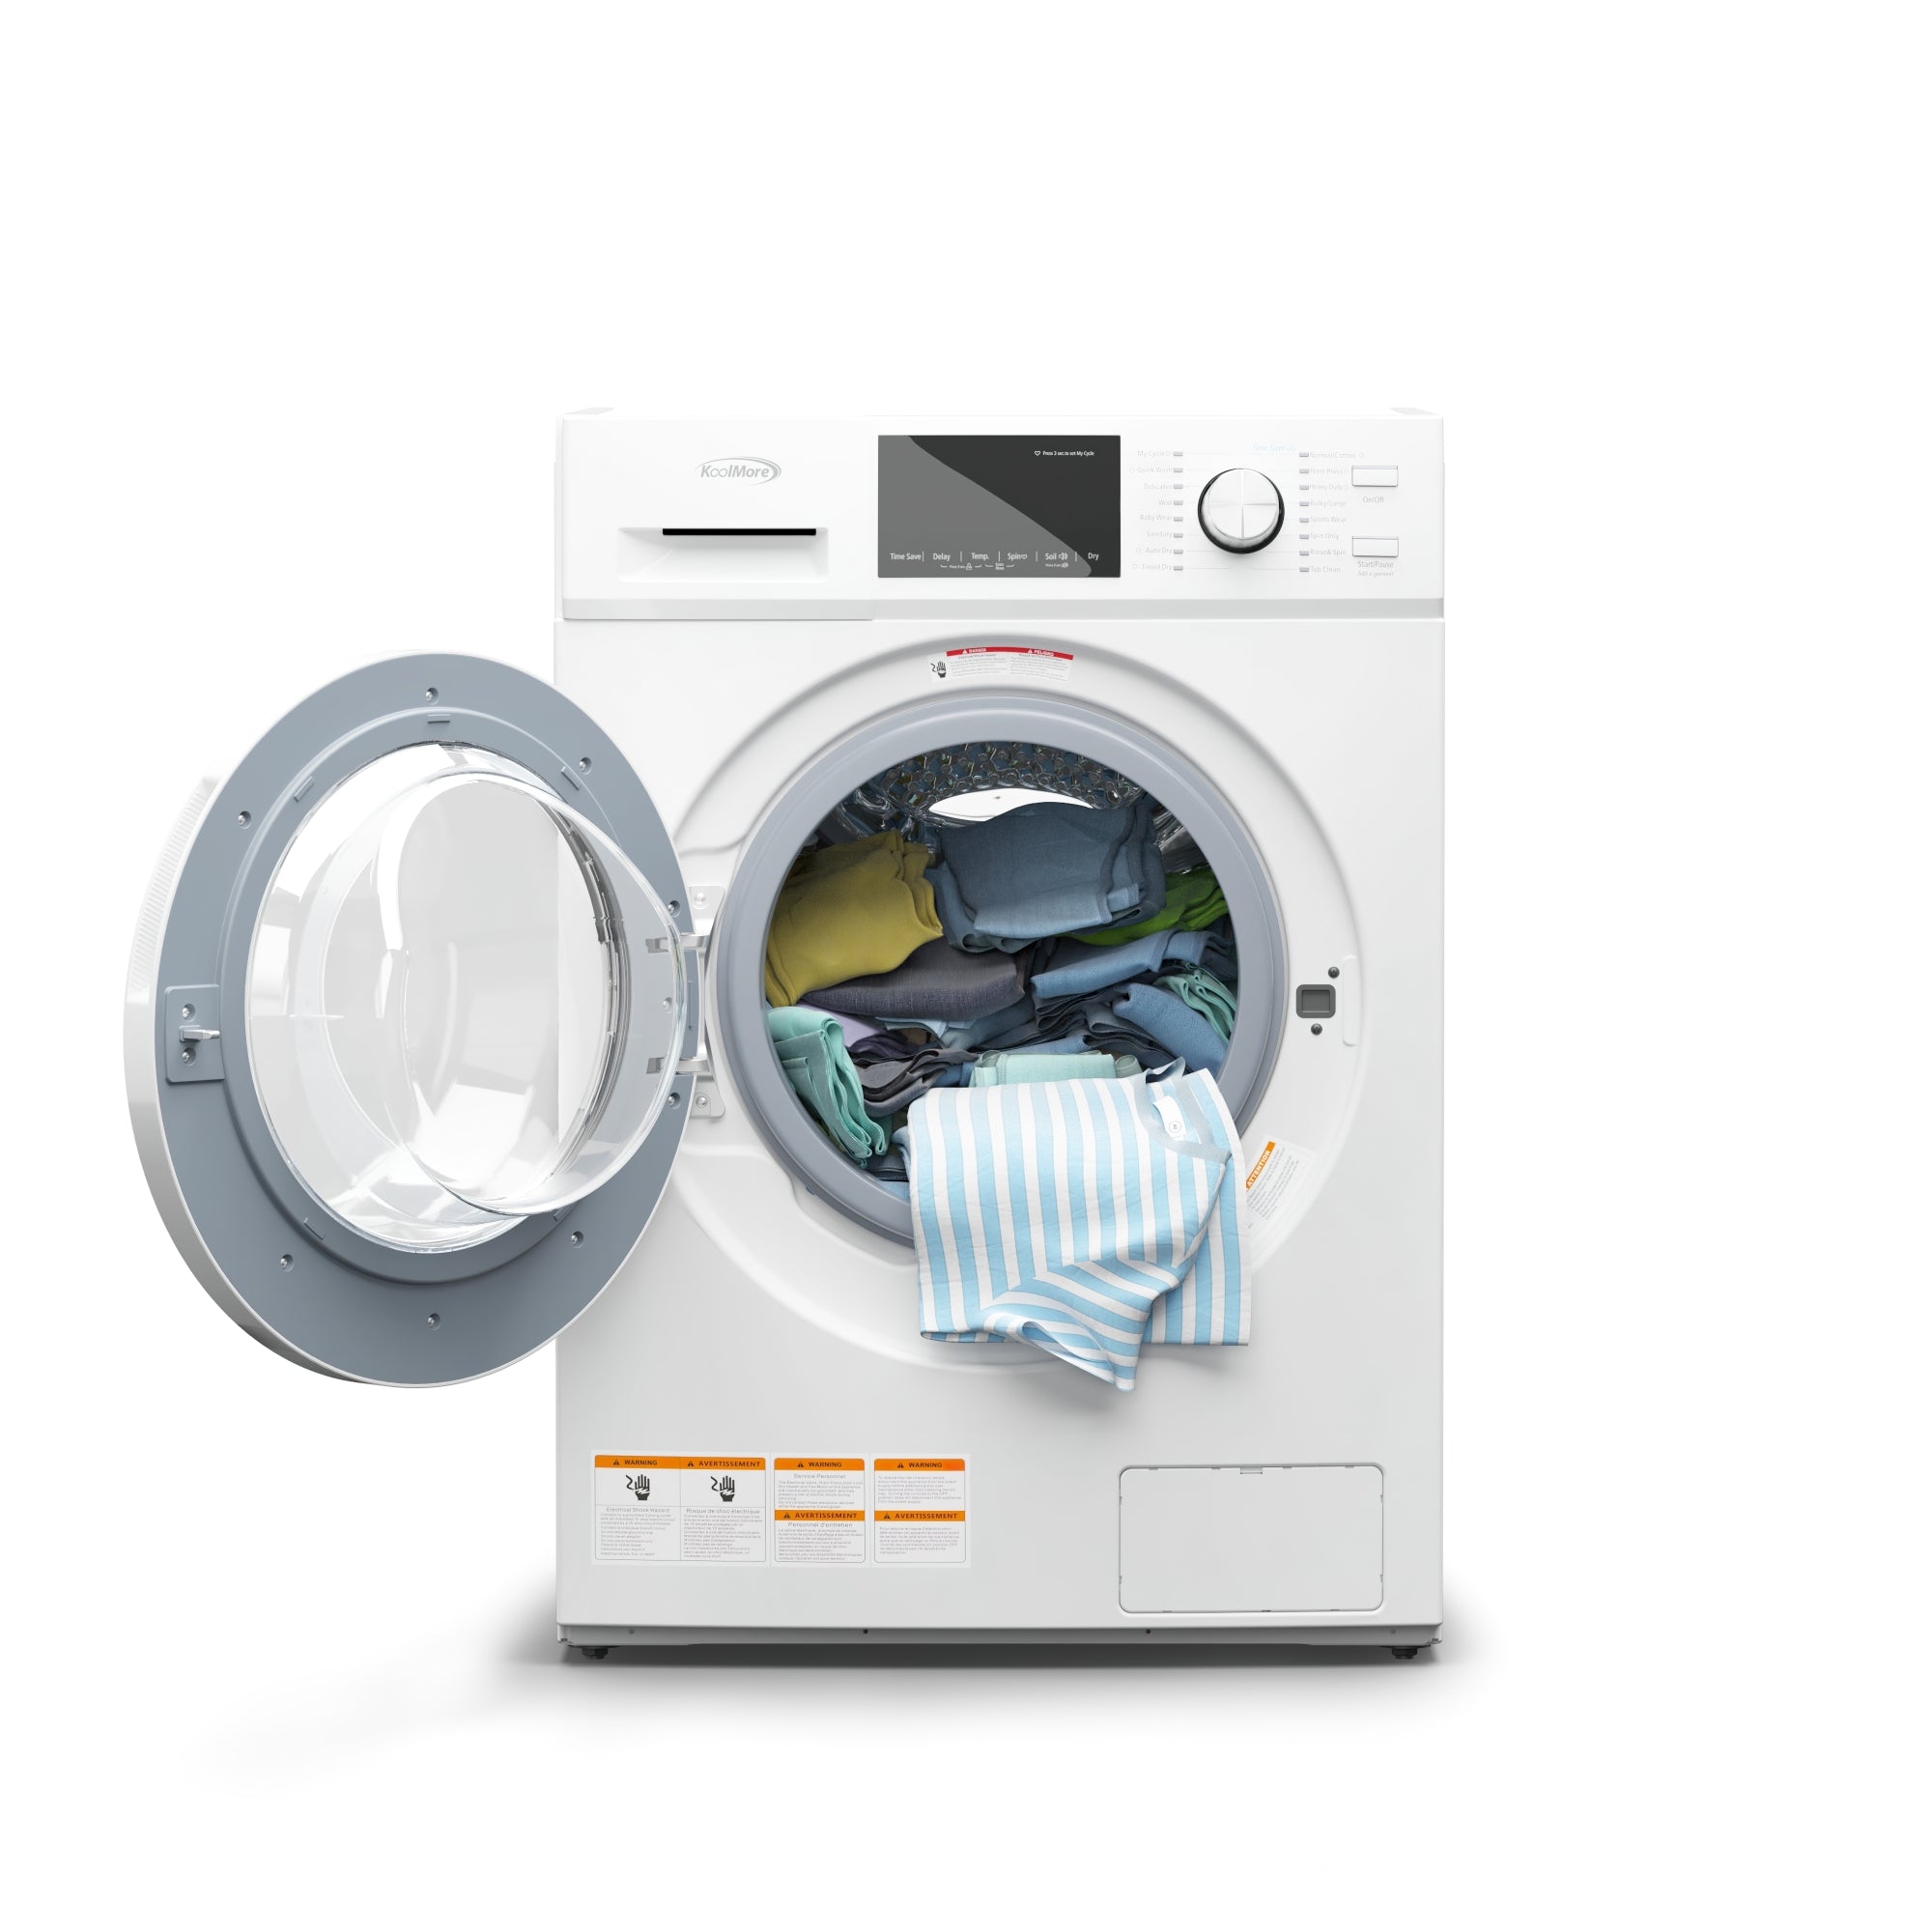 Energy Star 2.7 Cu. Ft. Ventless Washer/Dryer Combo in White